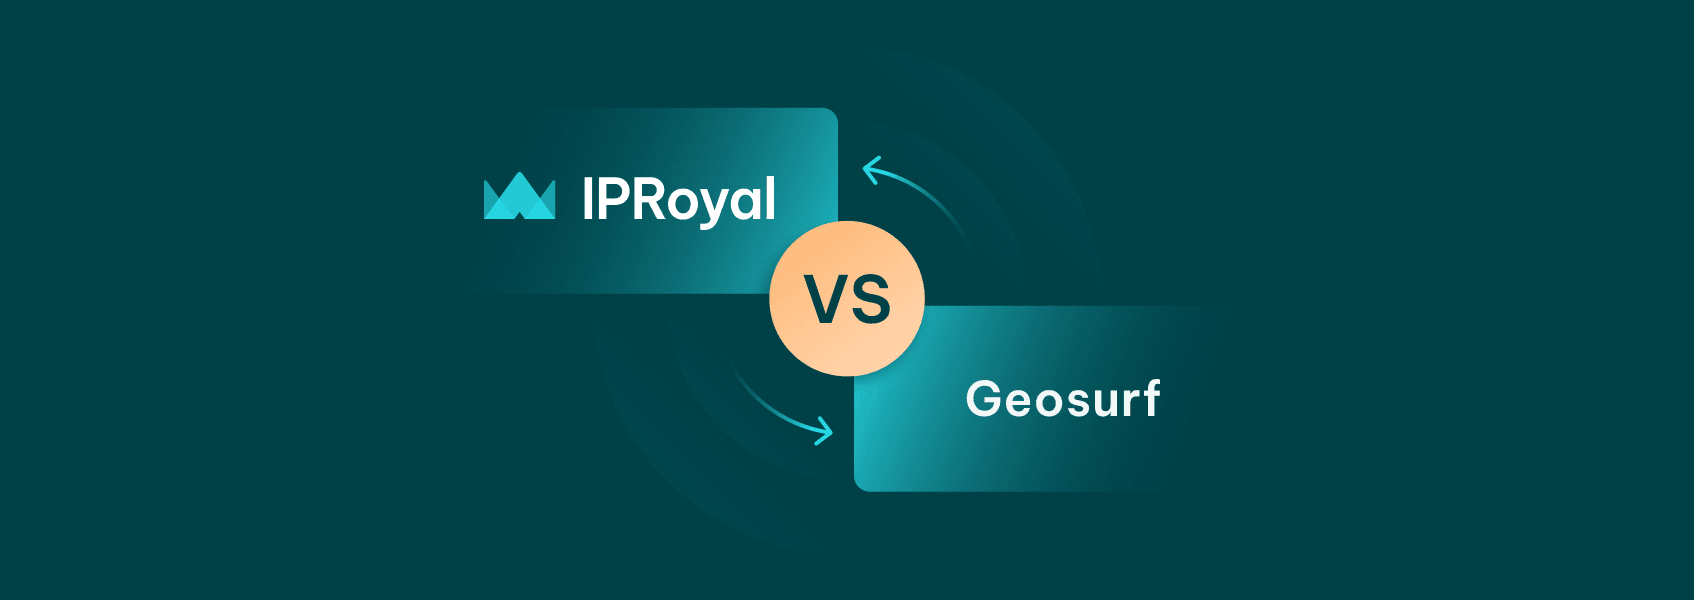 GeoSurf vs. IPRoyal - An In-depth Feature Comparison